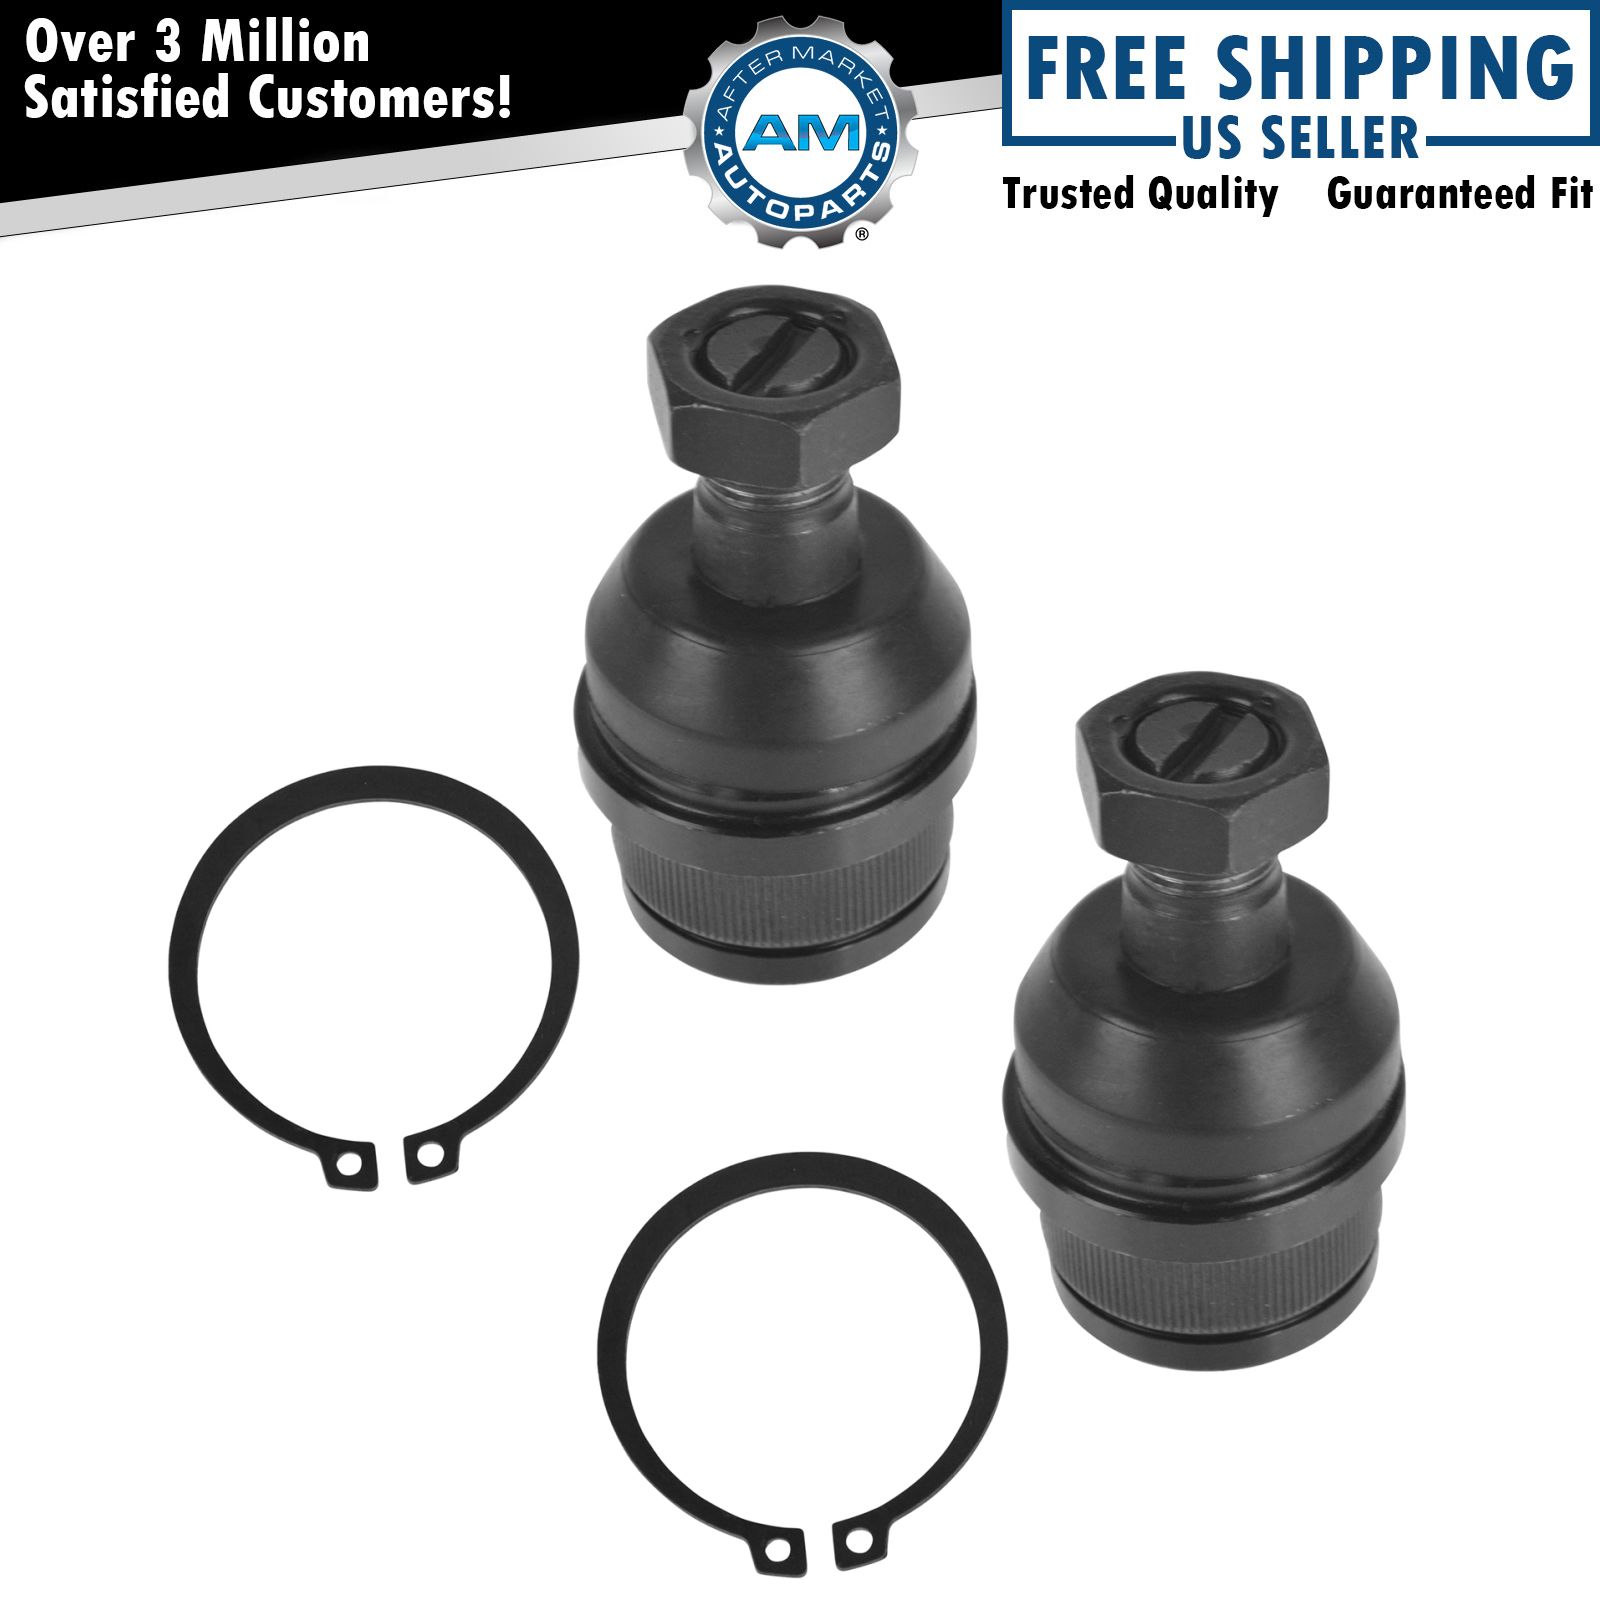 Front Lower Ball Joints 4WD 4x4 Pair Set for Chevy Dodge Ford Pickup Truck Jeep